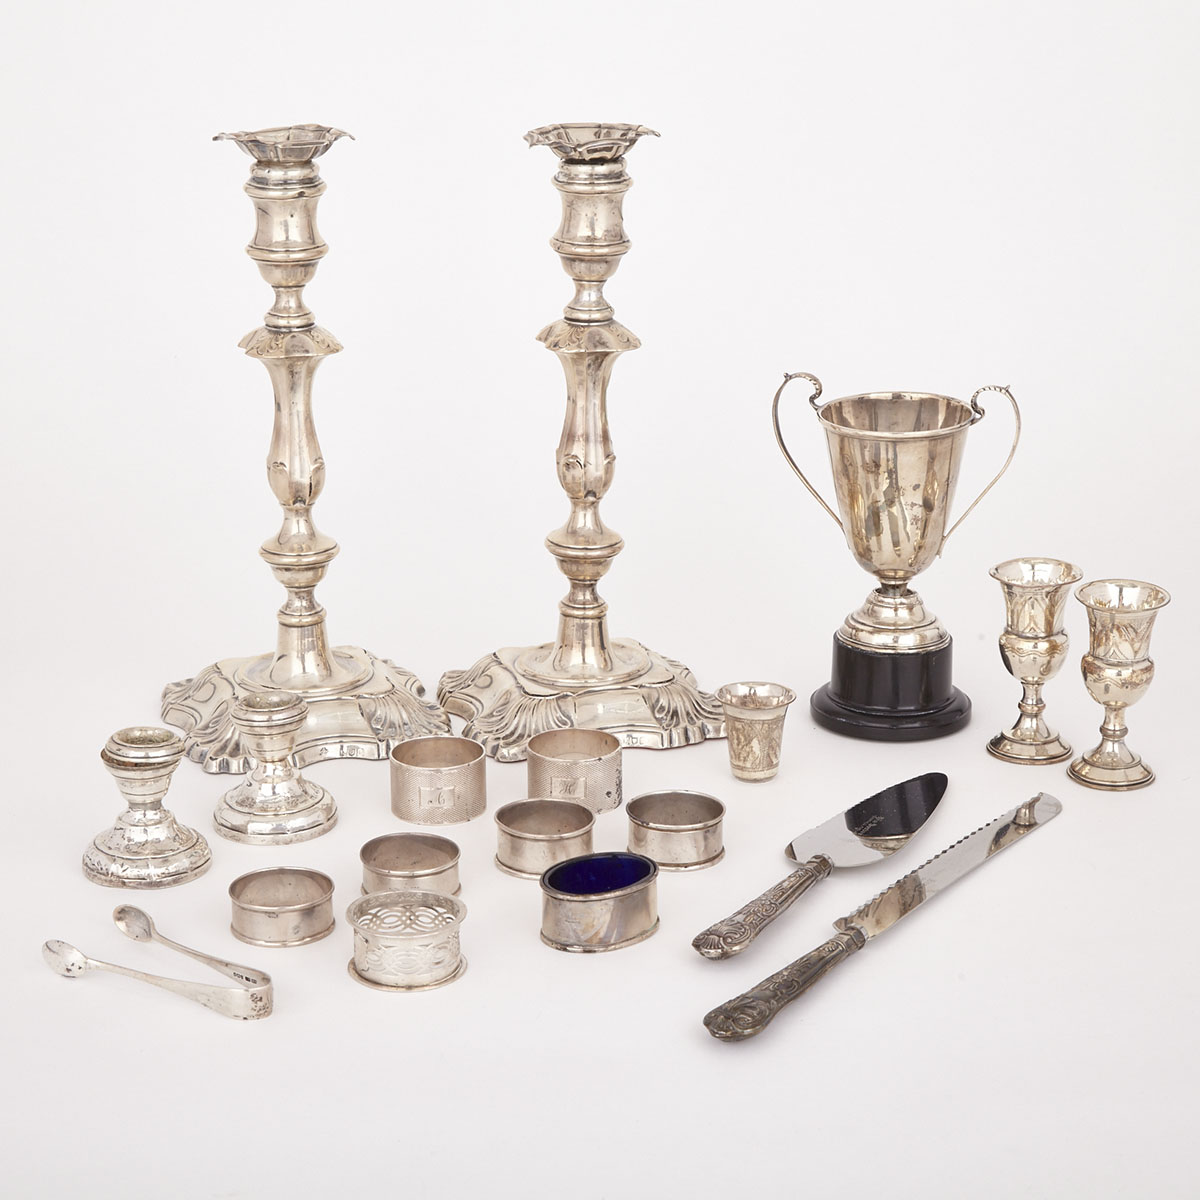 Group of Edwardian and Later English Silver, 20th century